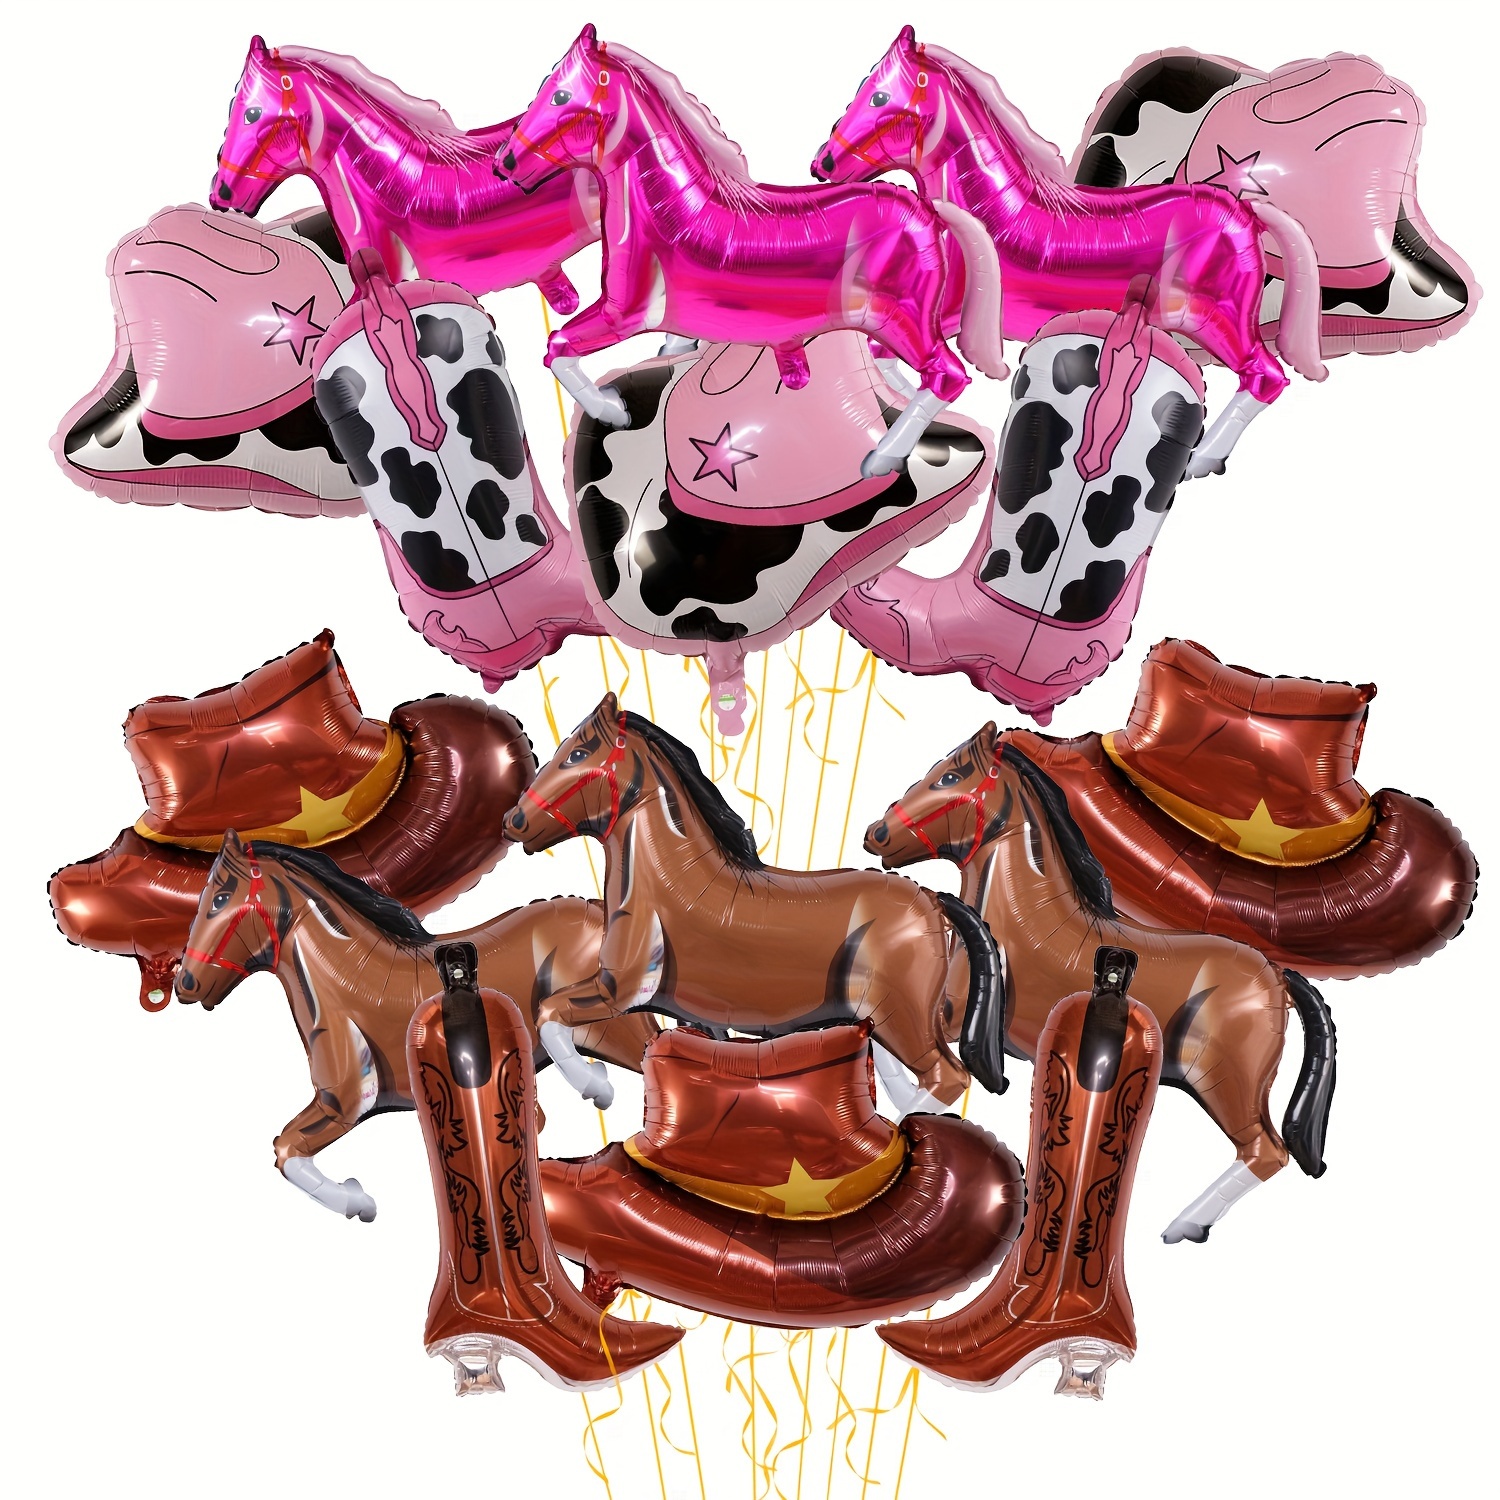 

Western Cowboy Party Balloon Set - Self-sealing Foil Balloons With Curling Ribbon For Birthday, Bachelor/bachelorette Parties & More - Includes Horse & Hat Designs